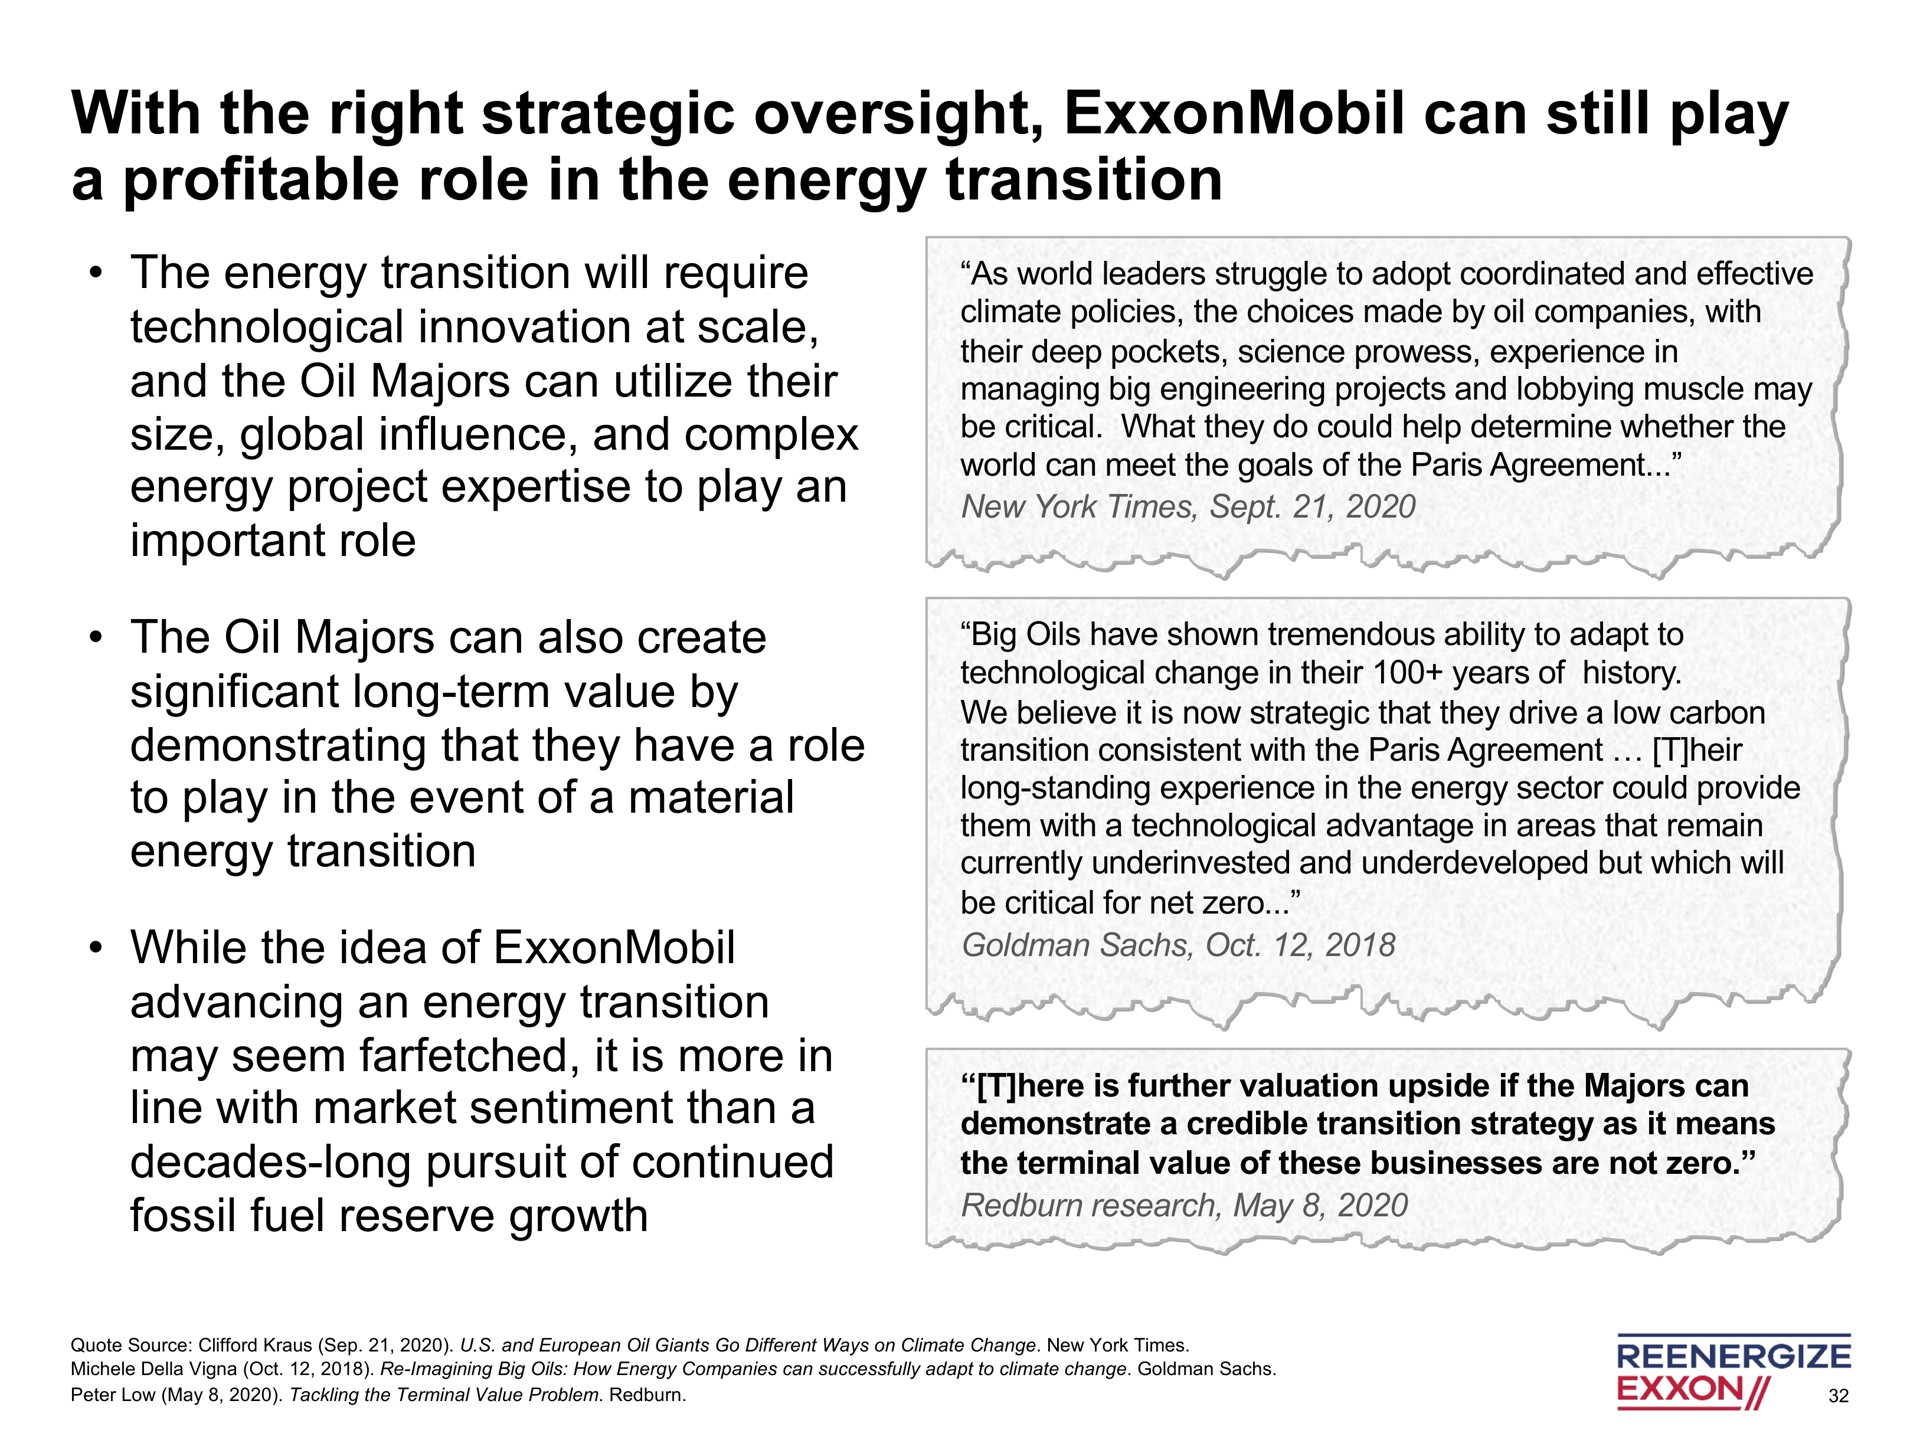 with the right strategic oversight can still play a profitable role in the energy transition | Engine No. 1